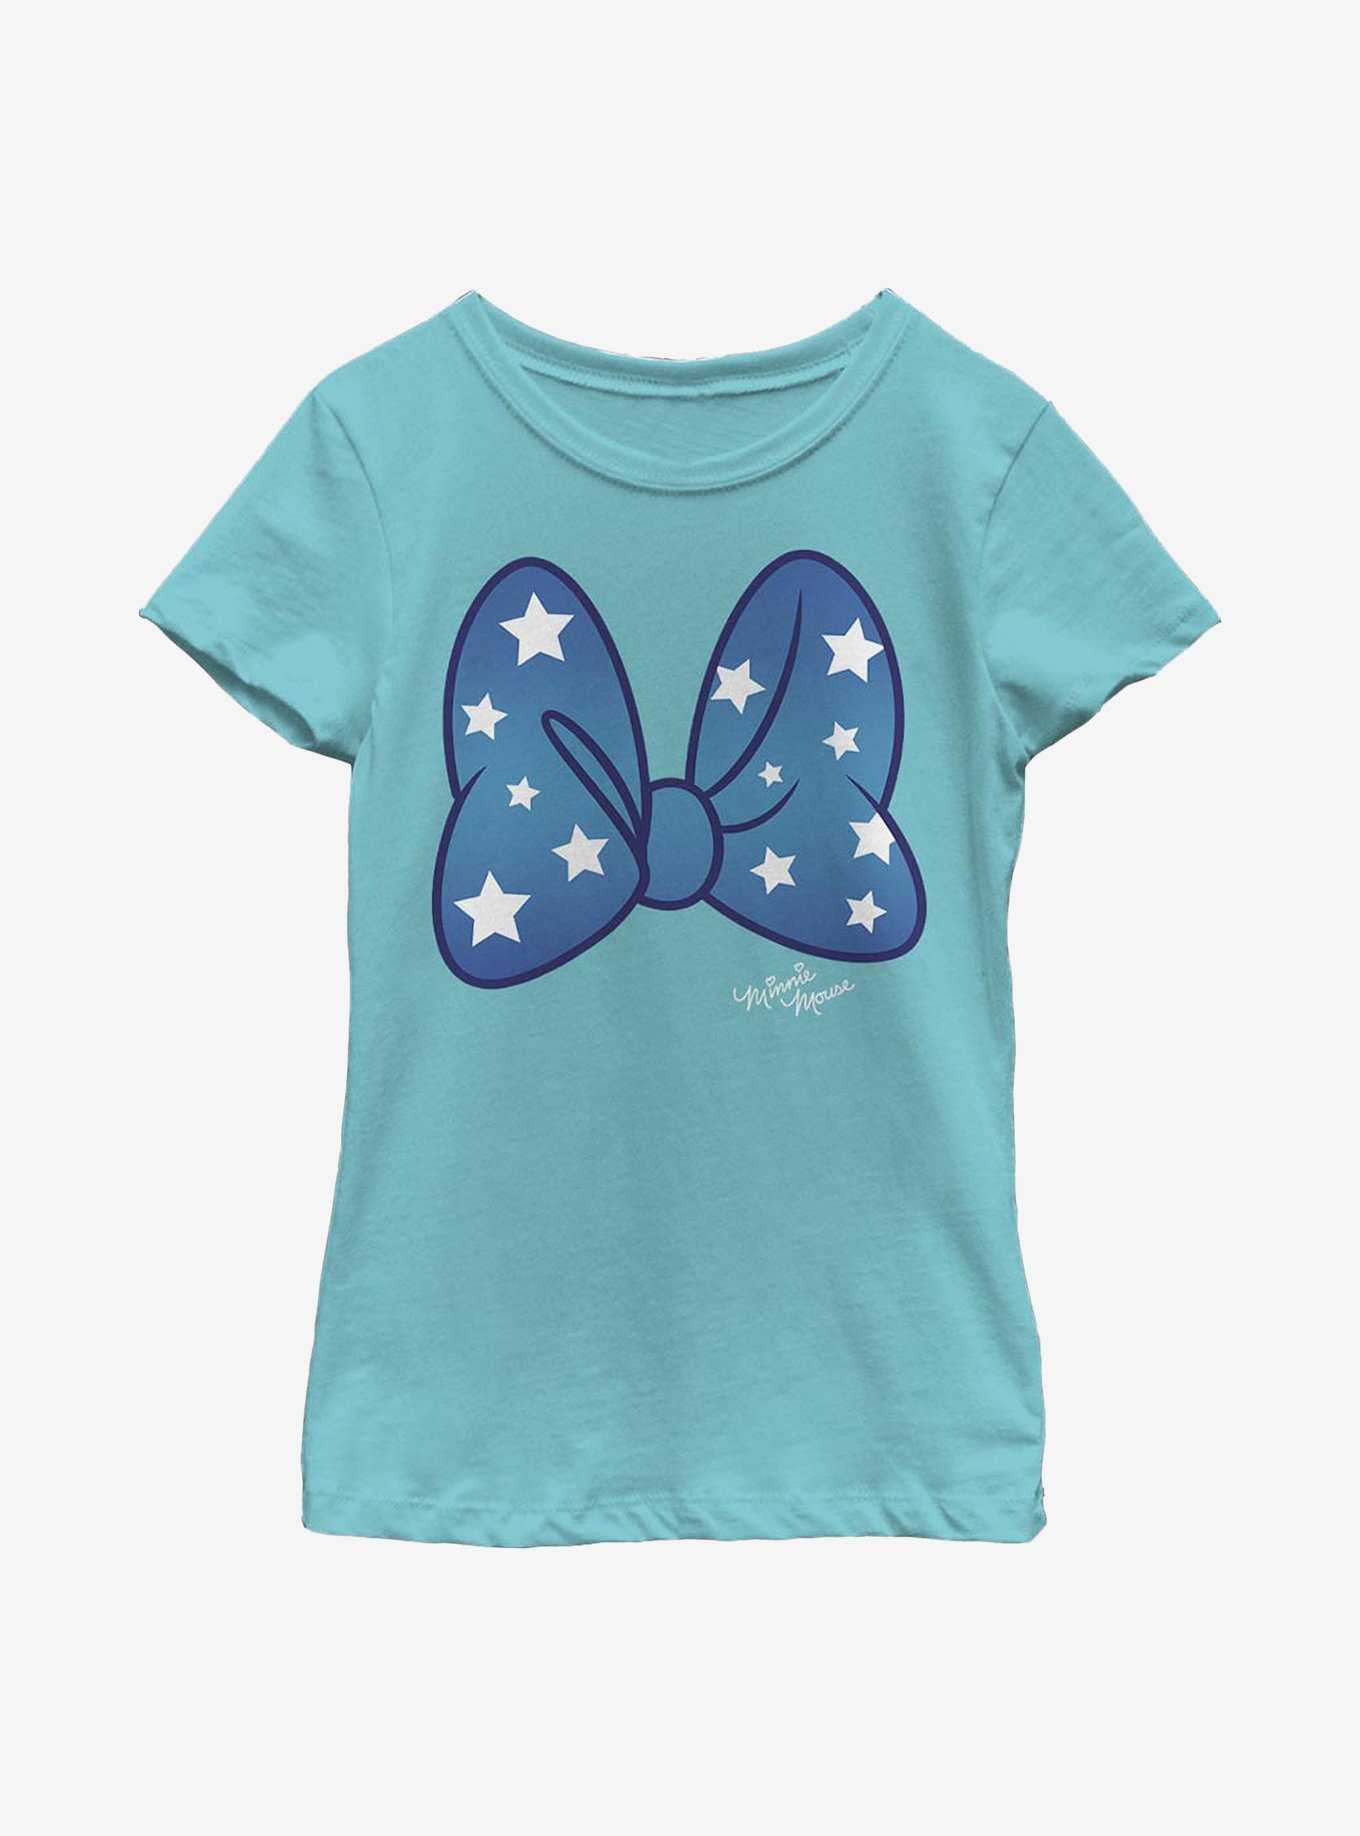 Disney Minnie Mouse Stars Bow Youth Girls T-Shirt, , hi-res